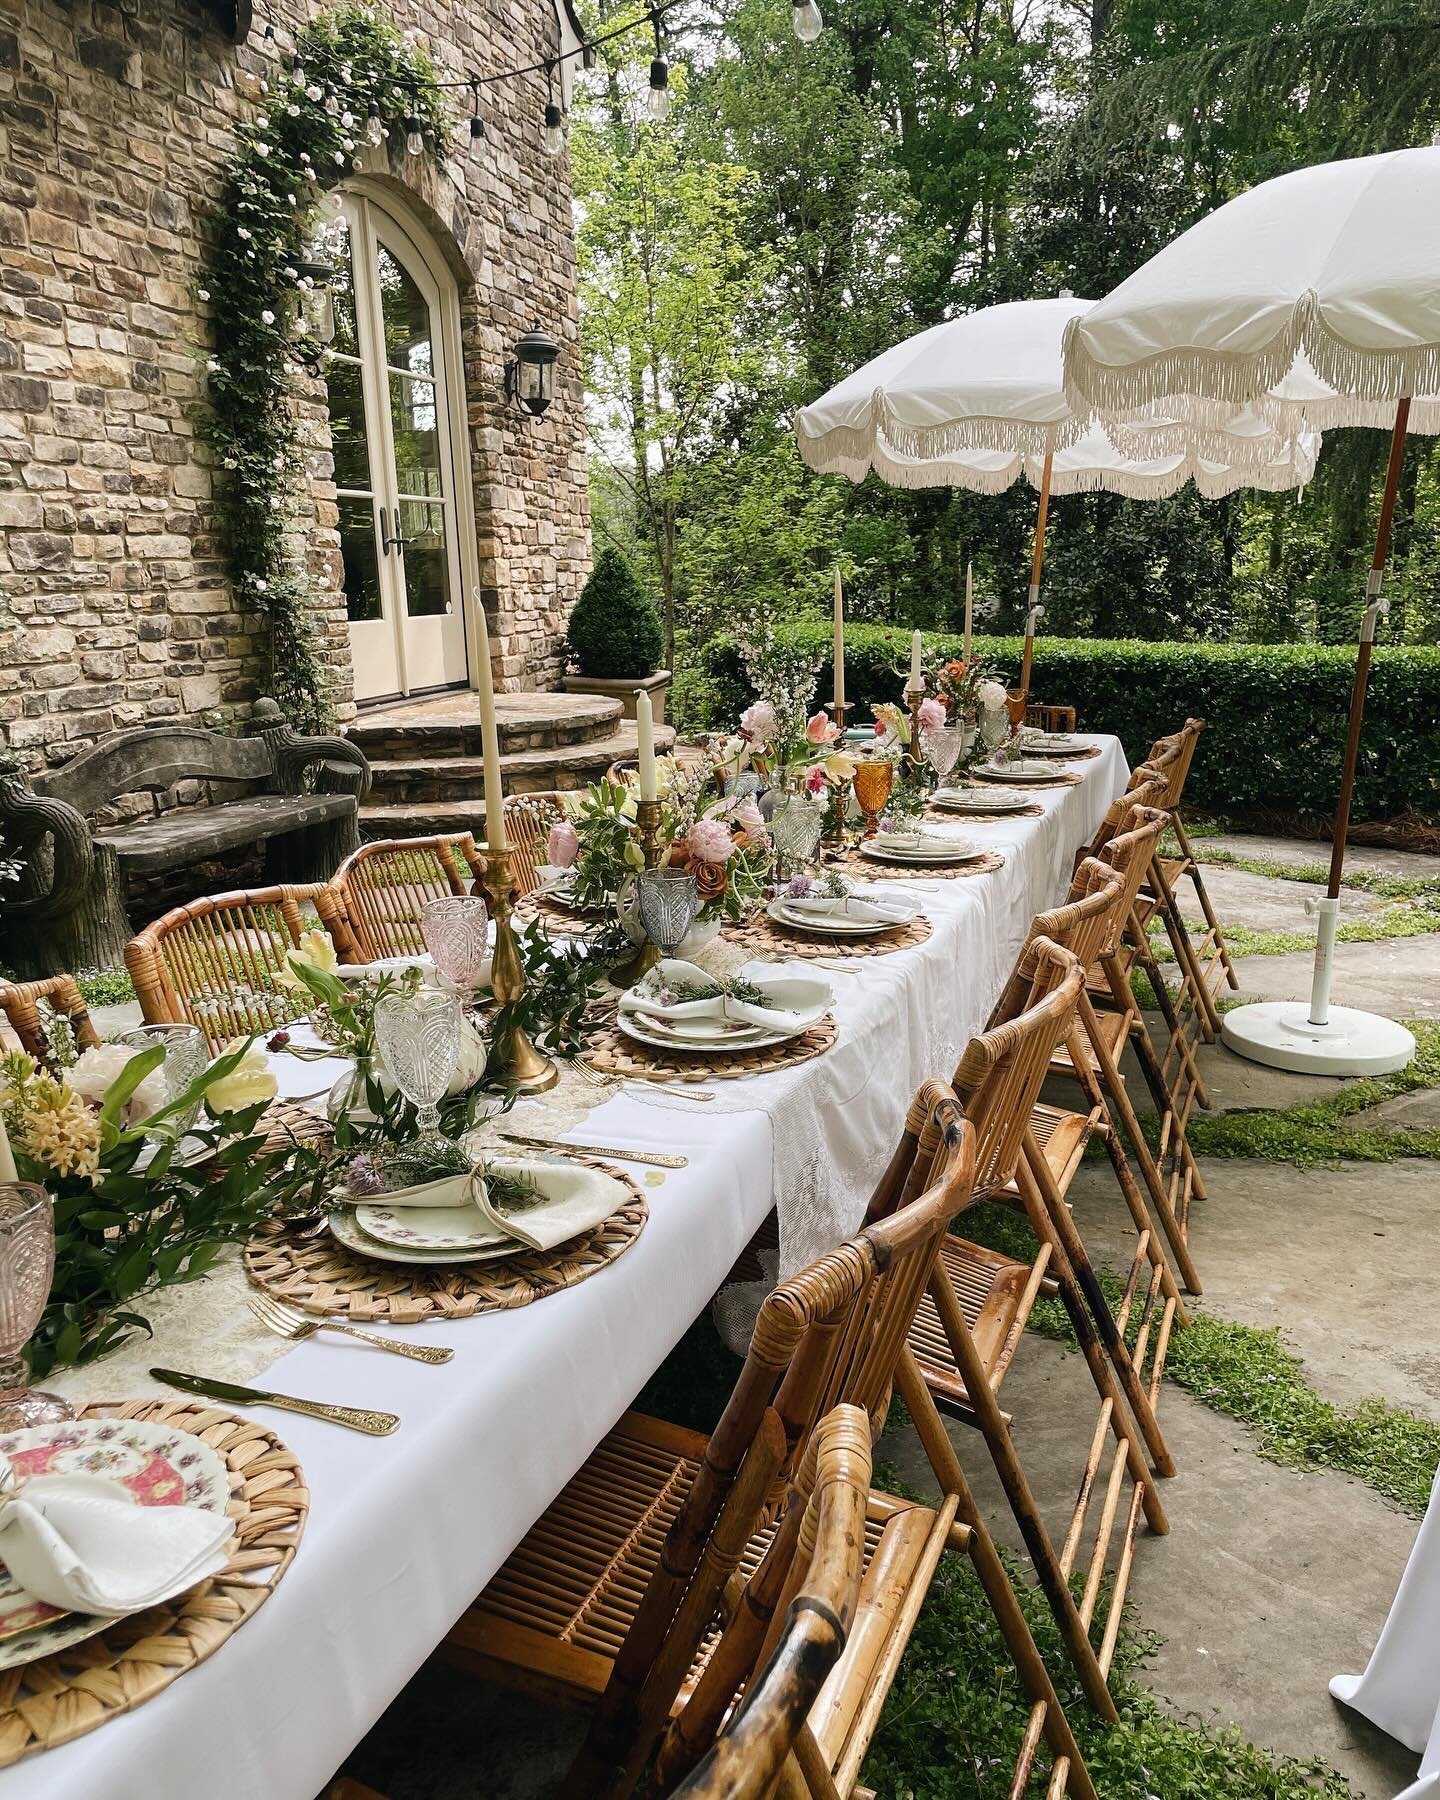 This Spring has been a whirlwind and we got to be part of some pretty special (and beautiful) gatherings. Can&rsquo;t wait to share. For now, a glimpse of a magical bridal shower featuring a Homespun brunch spread including our Smoked Salmon Crostini